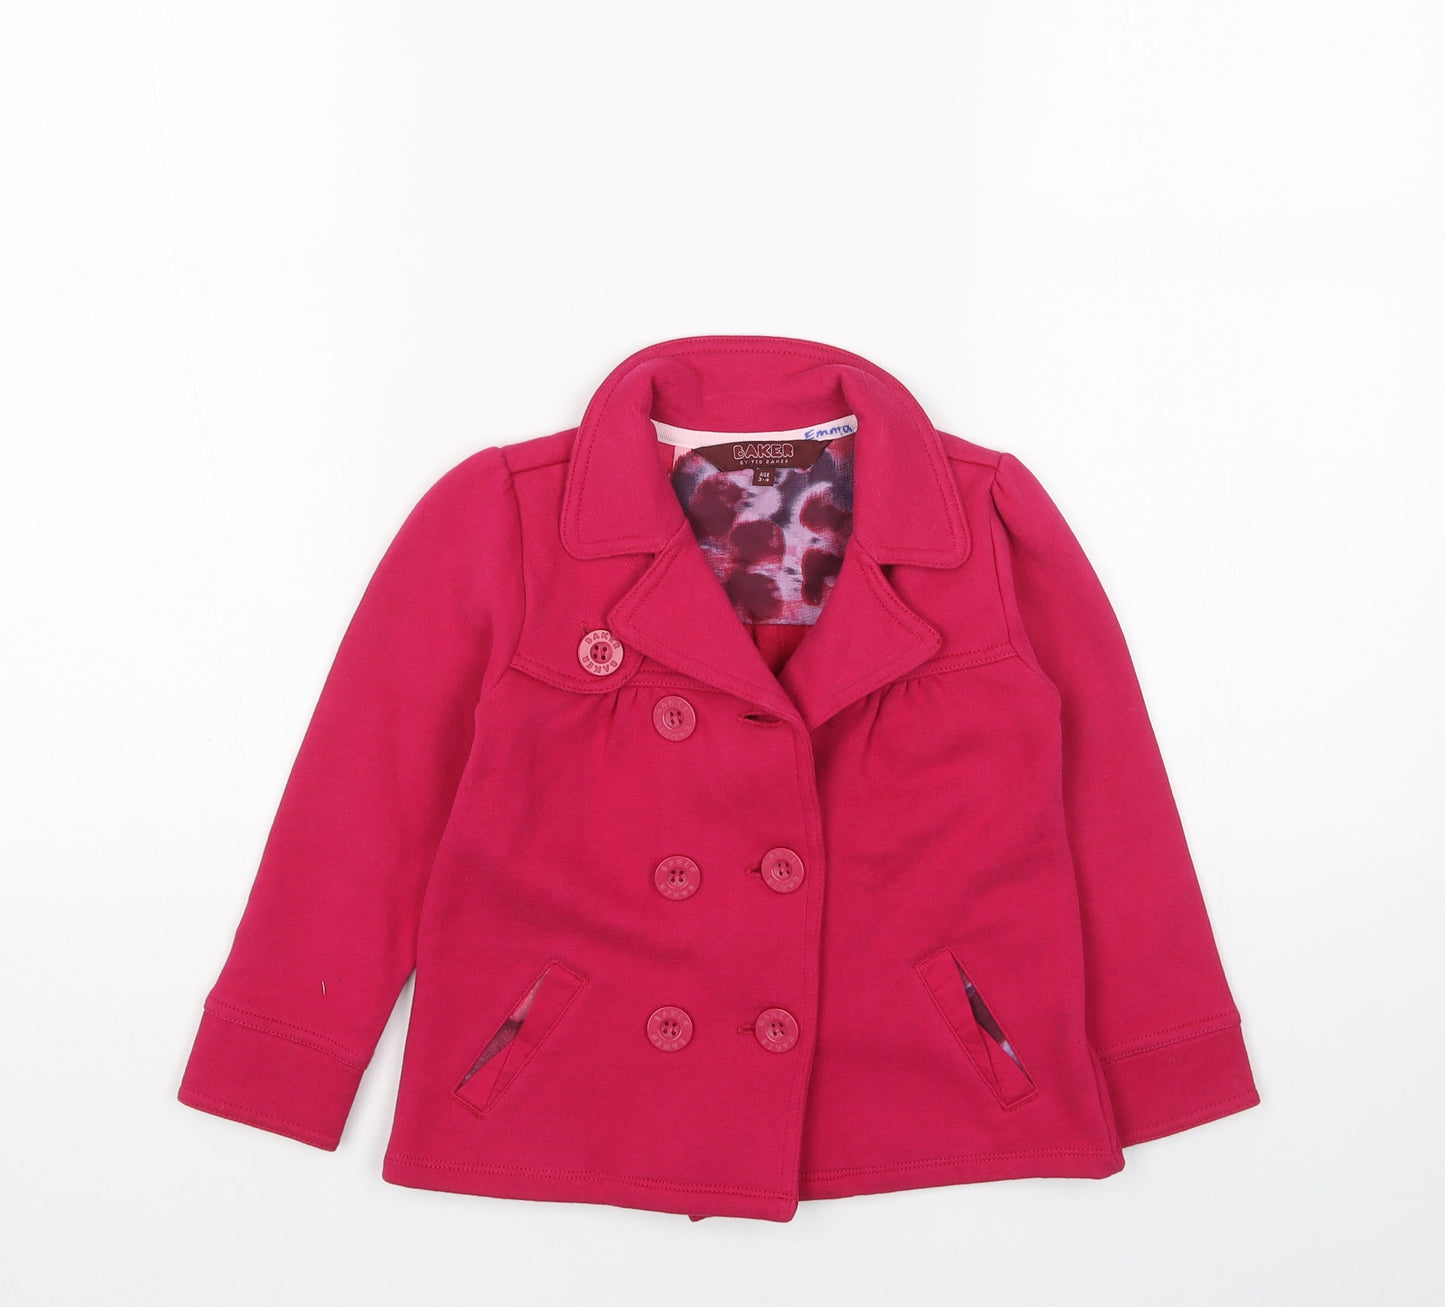 Baker Girls Pink Pea Coat Coat Size 3-4 Years Button